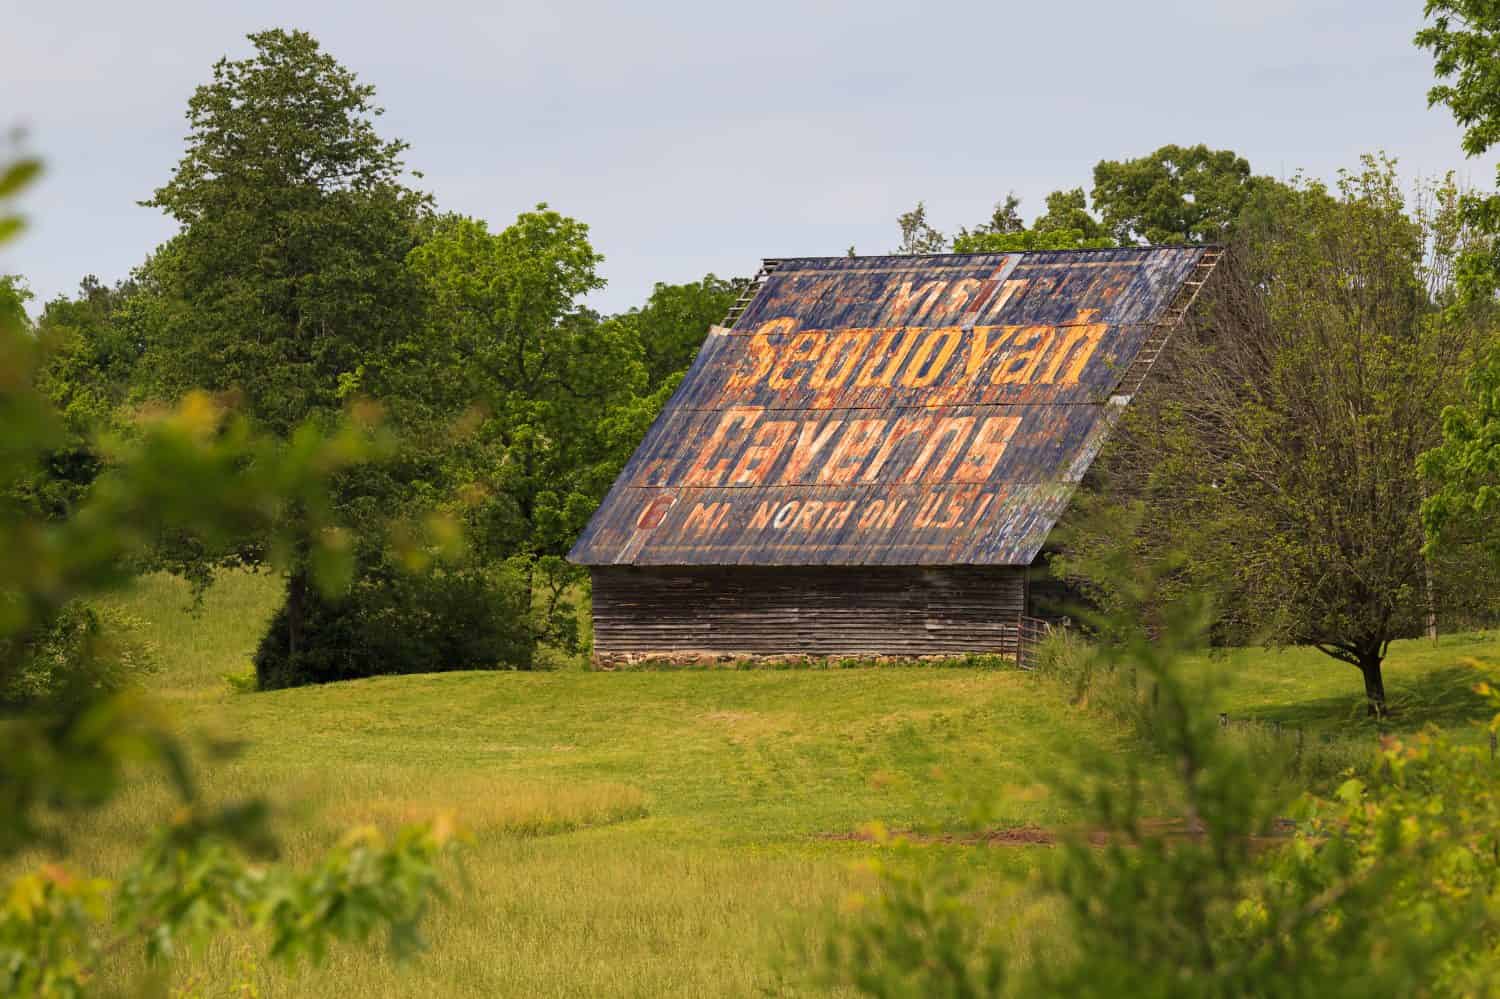 Old advertising barn with “Visit Sequoyah Caverns”  painted on the roof located in Valley Head, Alabama